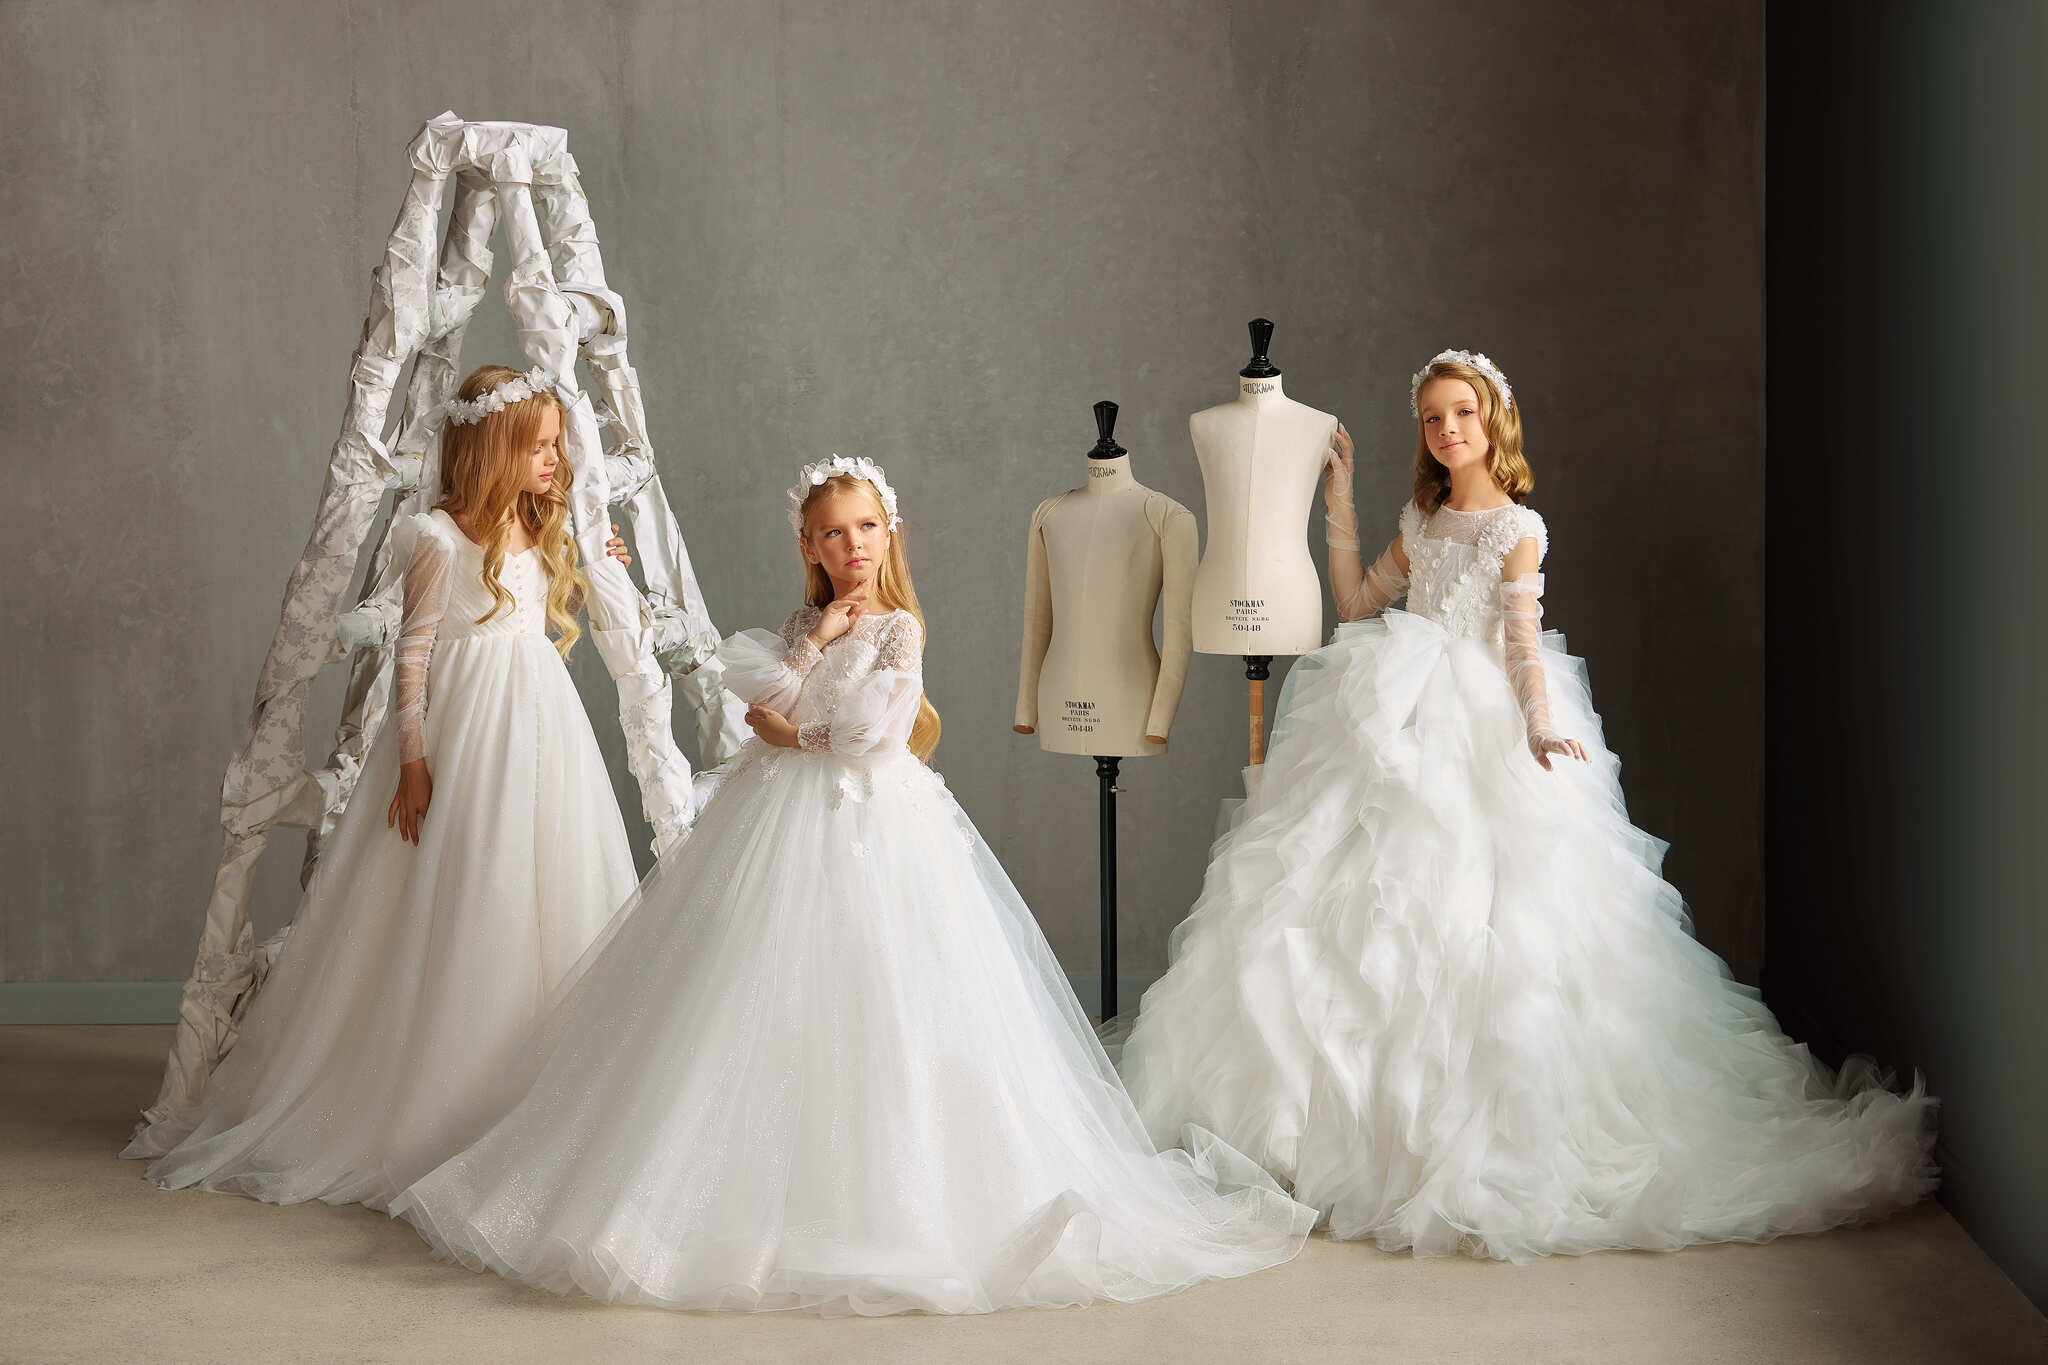 First communion dresses | Mia Bambina Boutique - First holy